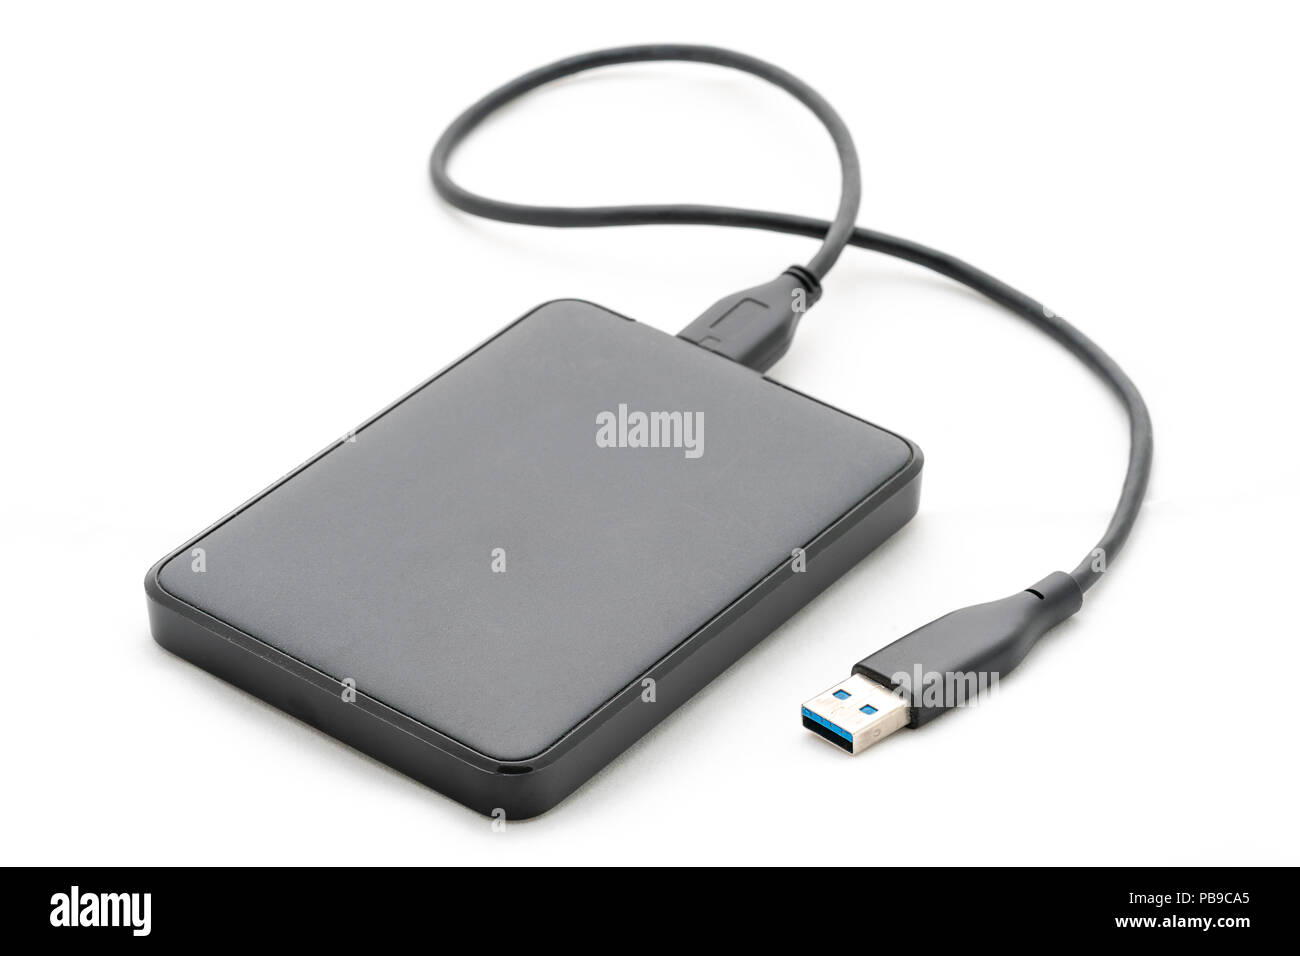 Isolated external hard drive or hard disk or HDD on white background. Stock Photo